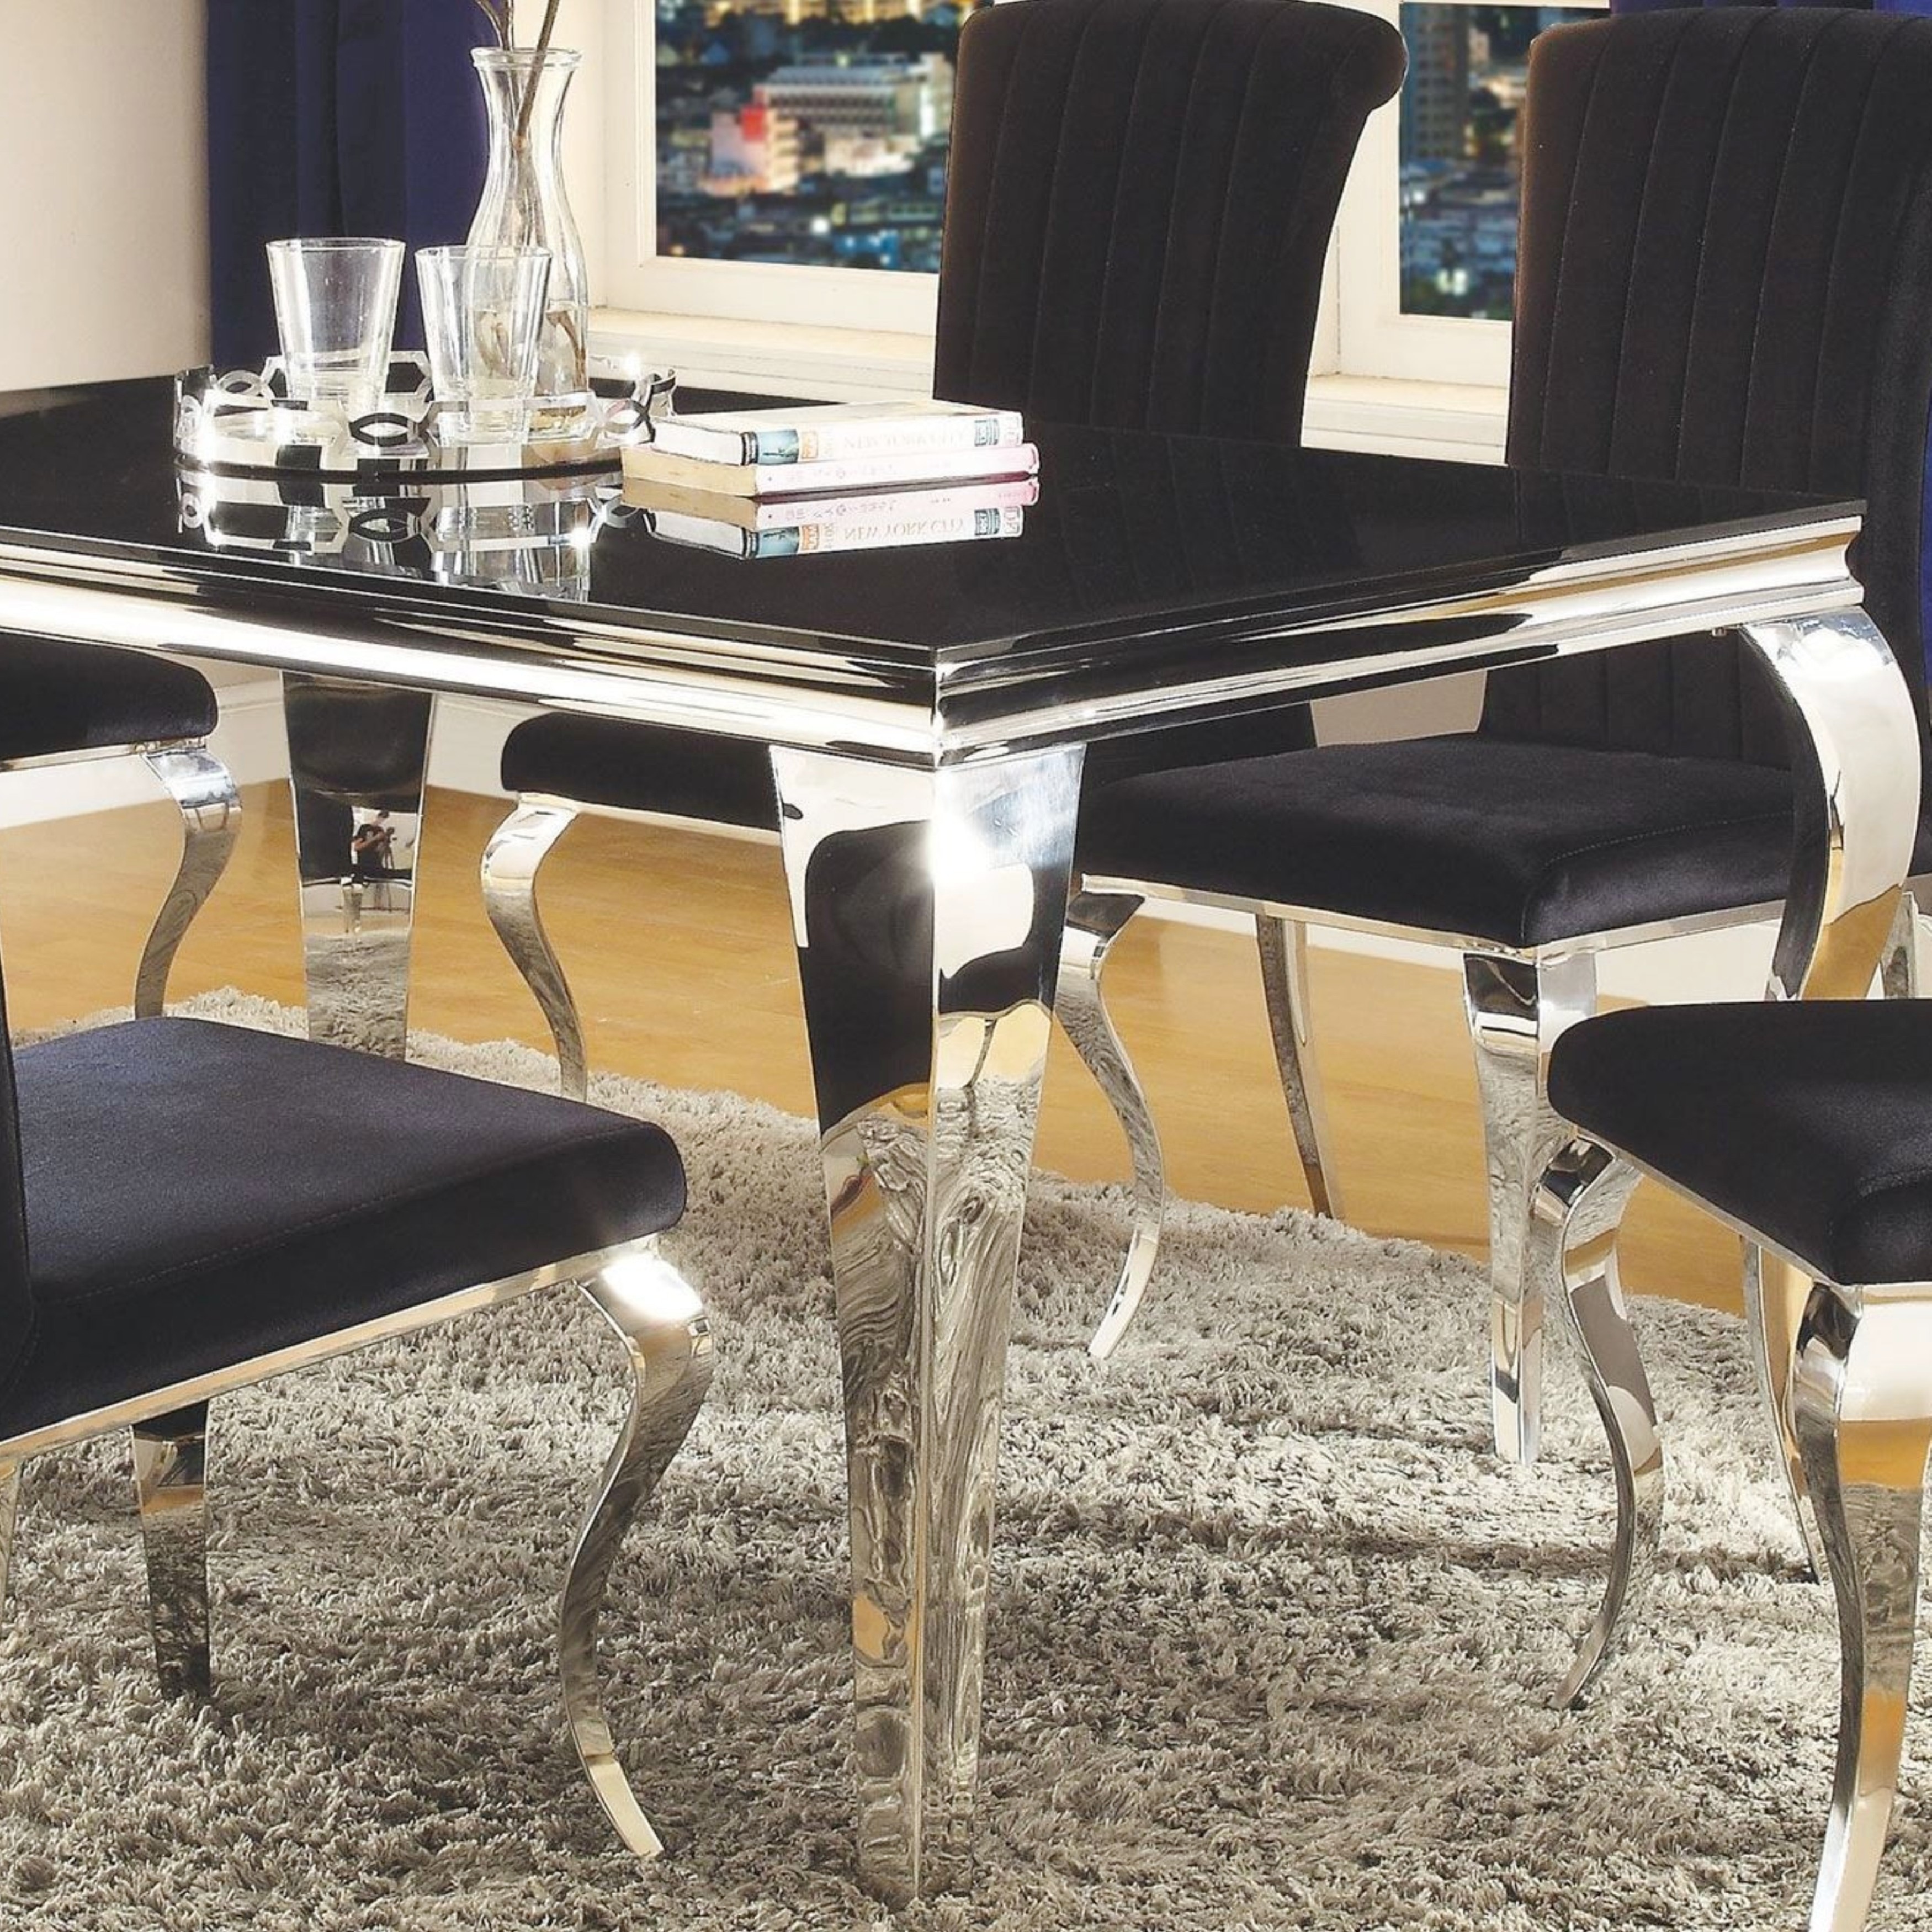 Cabriole Design Black Tampered Glass Top Dining Table Silver Table Only On Sale Overstock 14519009